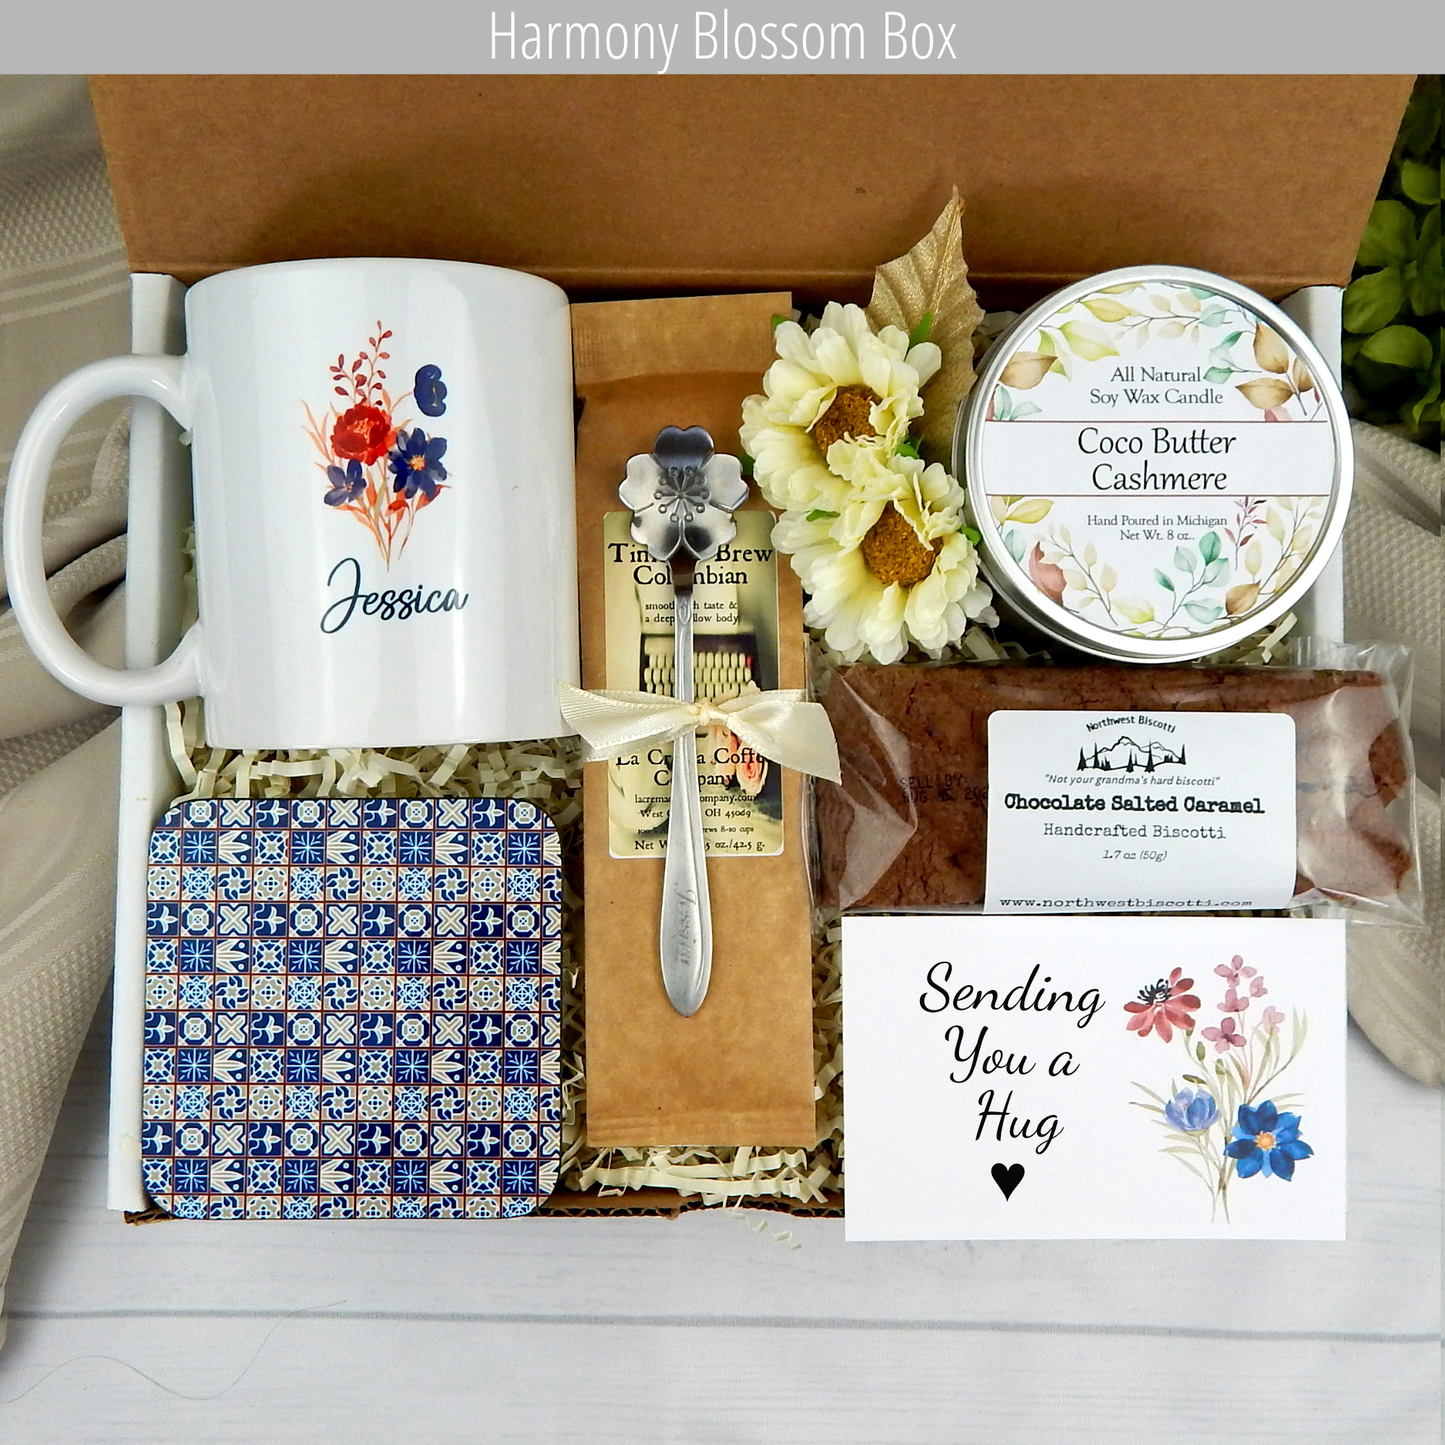 Comfort and support: Encouragement gift basket with a custom mug, coffee, and delectable treats.